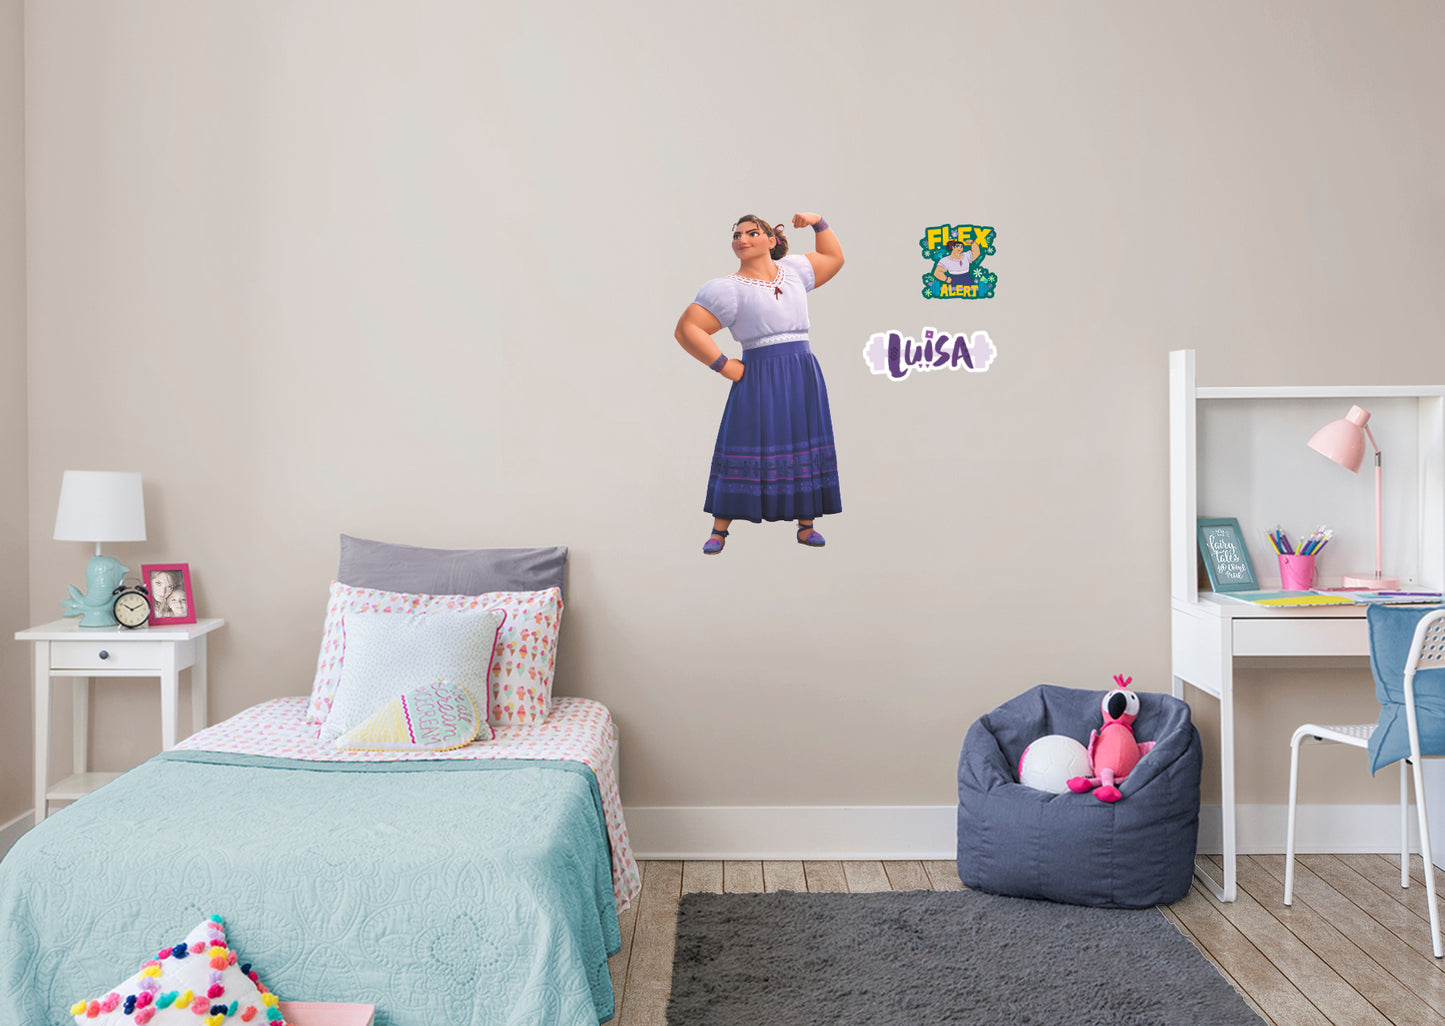 Encanto: Luisa RealBig        - Officially Licensed Disney Removable     Adhesive Decal